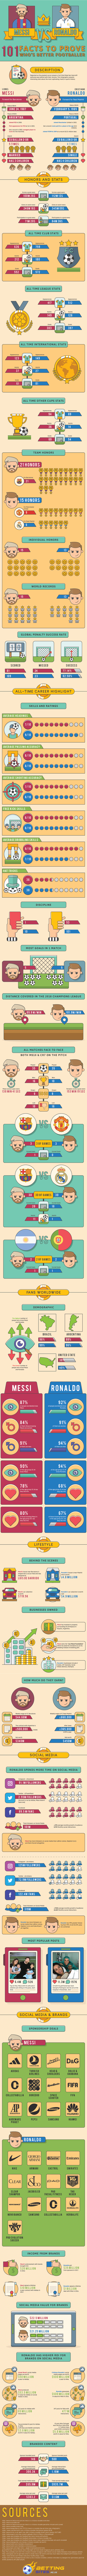 Messi Vs Ronaldo Who Is The Greatest - Infographic